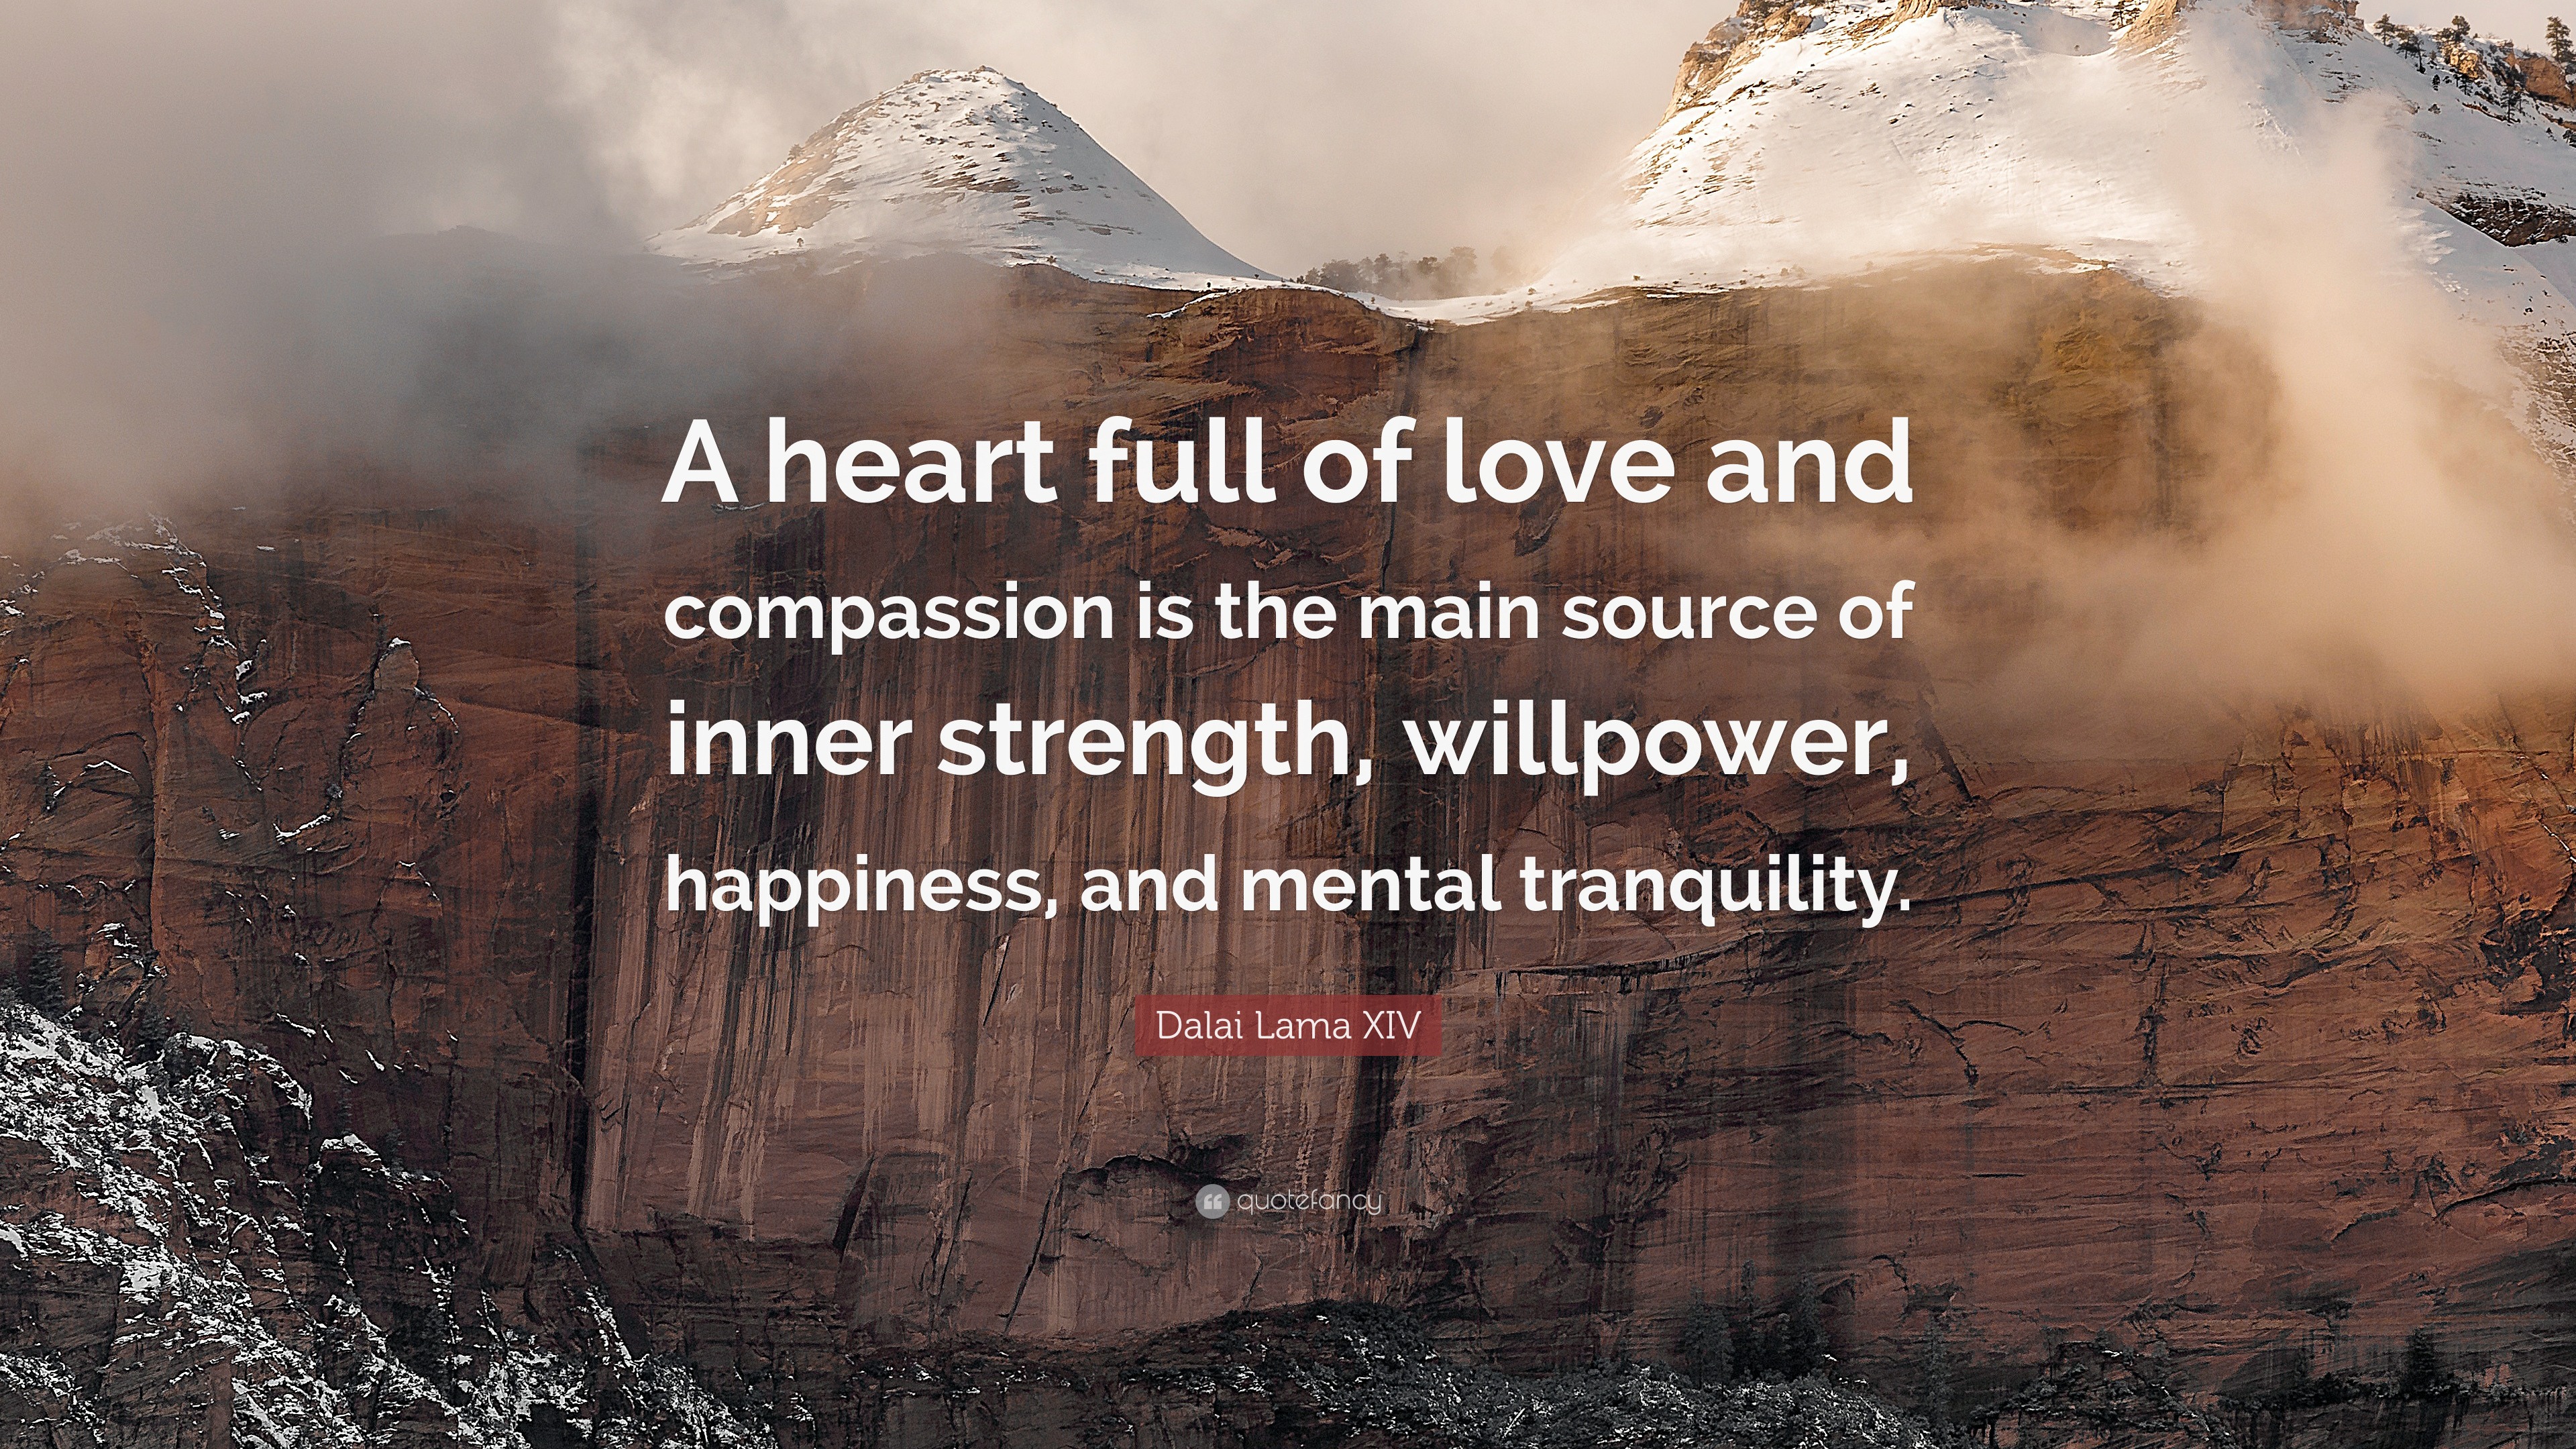 Dalai Lama XIV Quote: “A heart full of love and compassion is the main